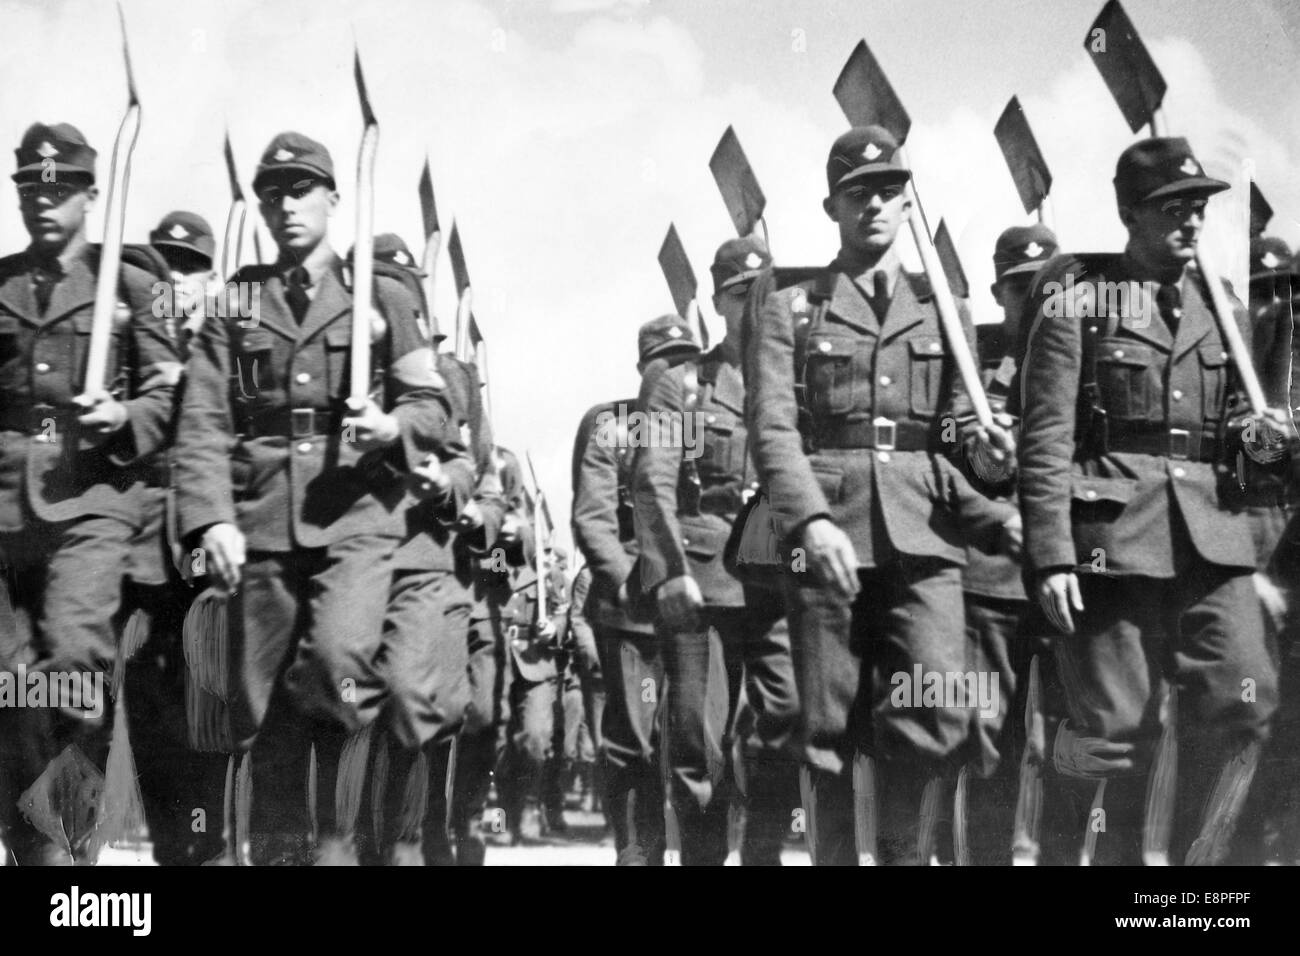 Nuremberg Rally 1934 in Nuremberg, Germany - Members of the Reich Labour Service (RAD) march with spades in their hands. Still from the propaganda film 'Triumph of the Will'. (Flaws in quality due to the historic picture copy) Fotoarchiv für Zeitgeschichtee - NO WIRE SERVICE - Stock Photo